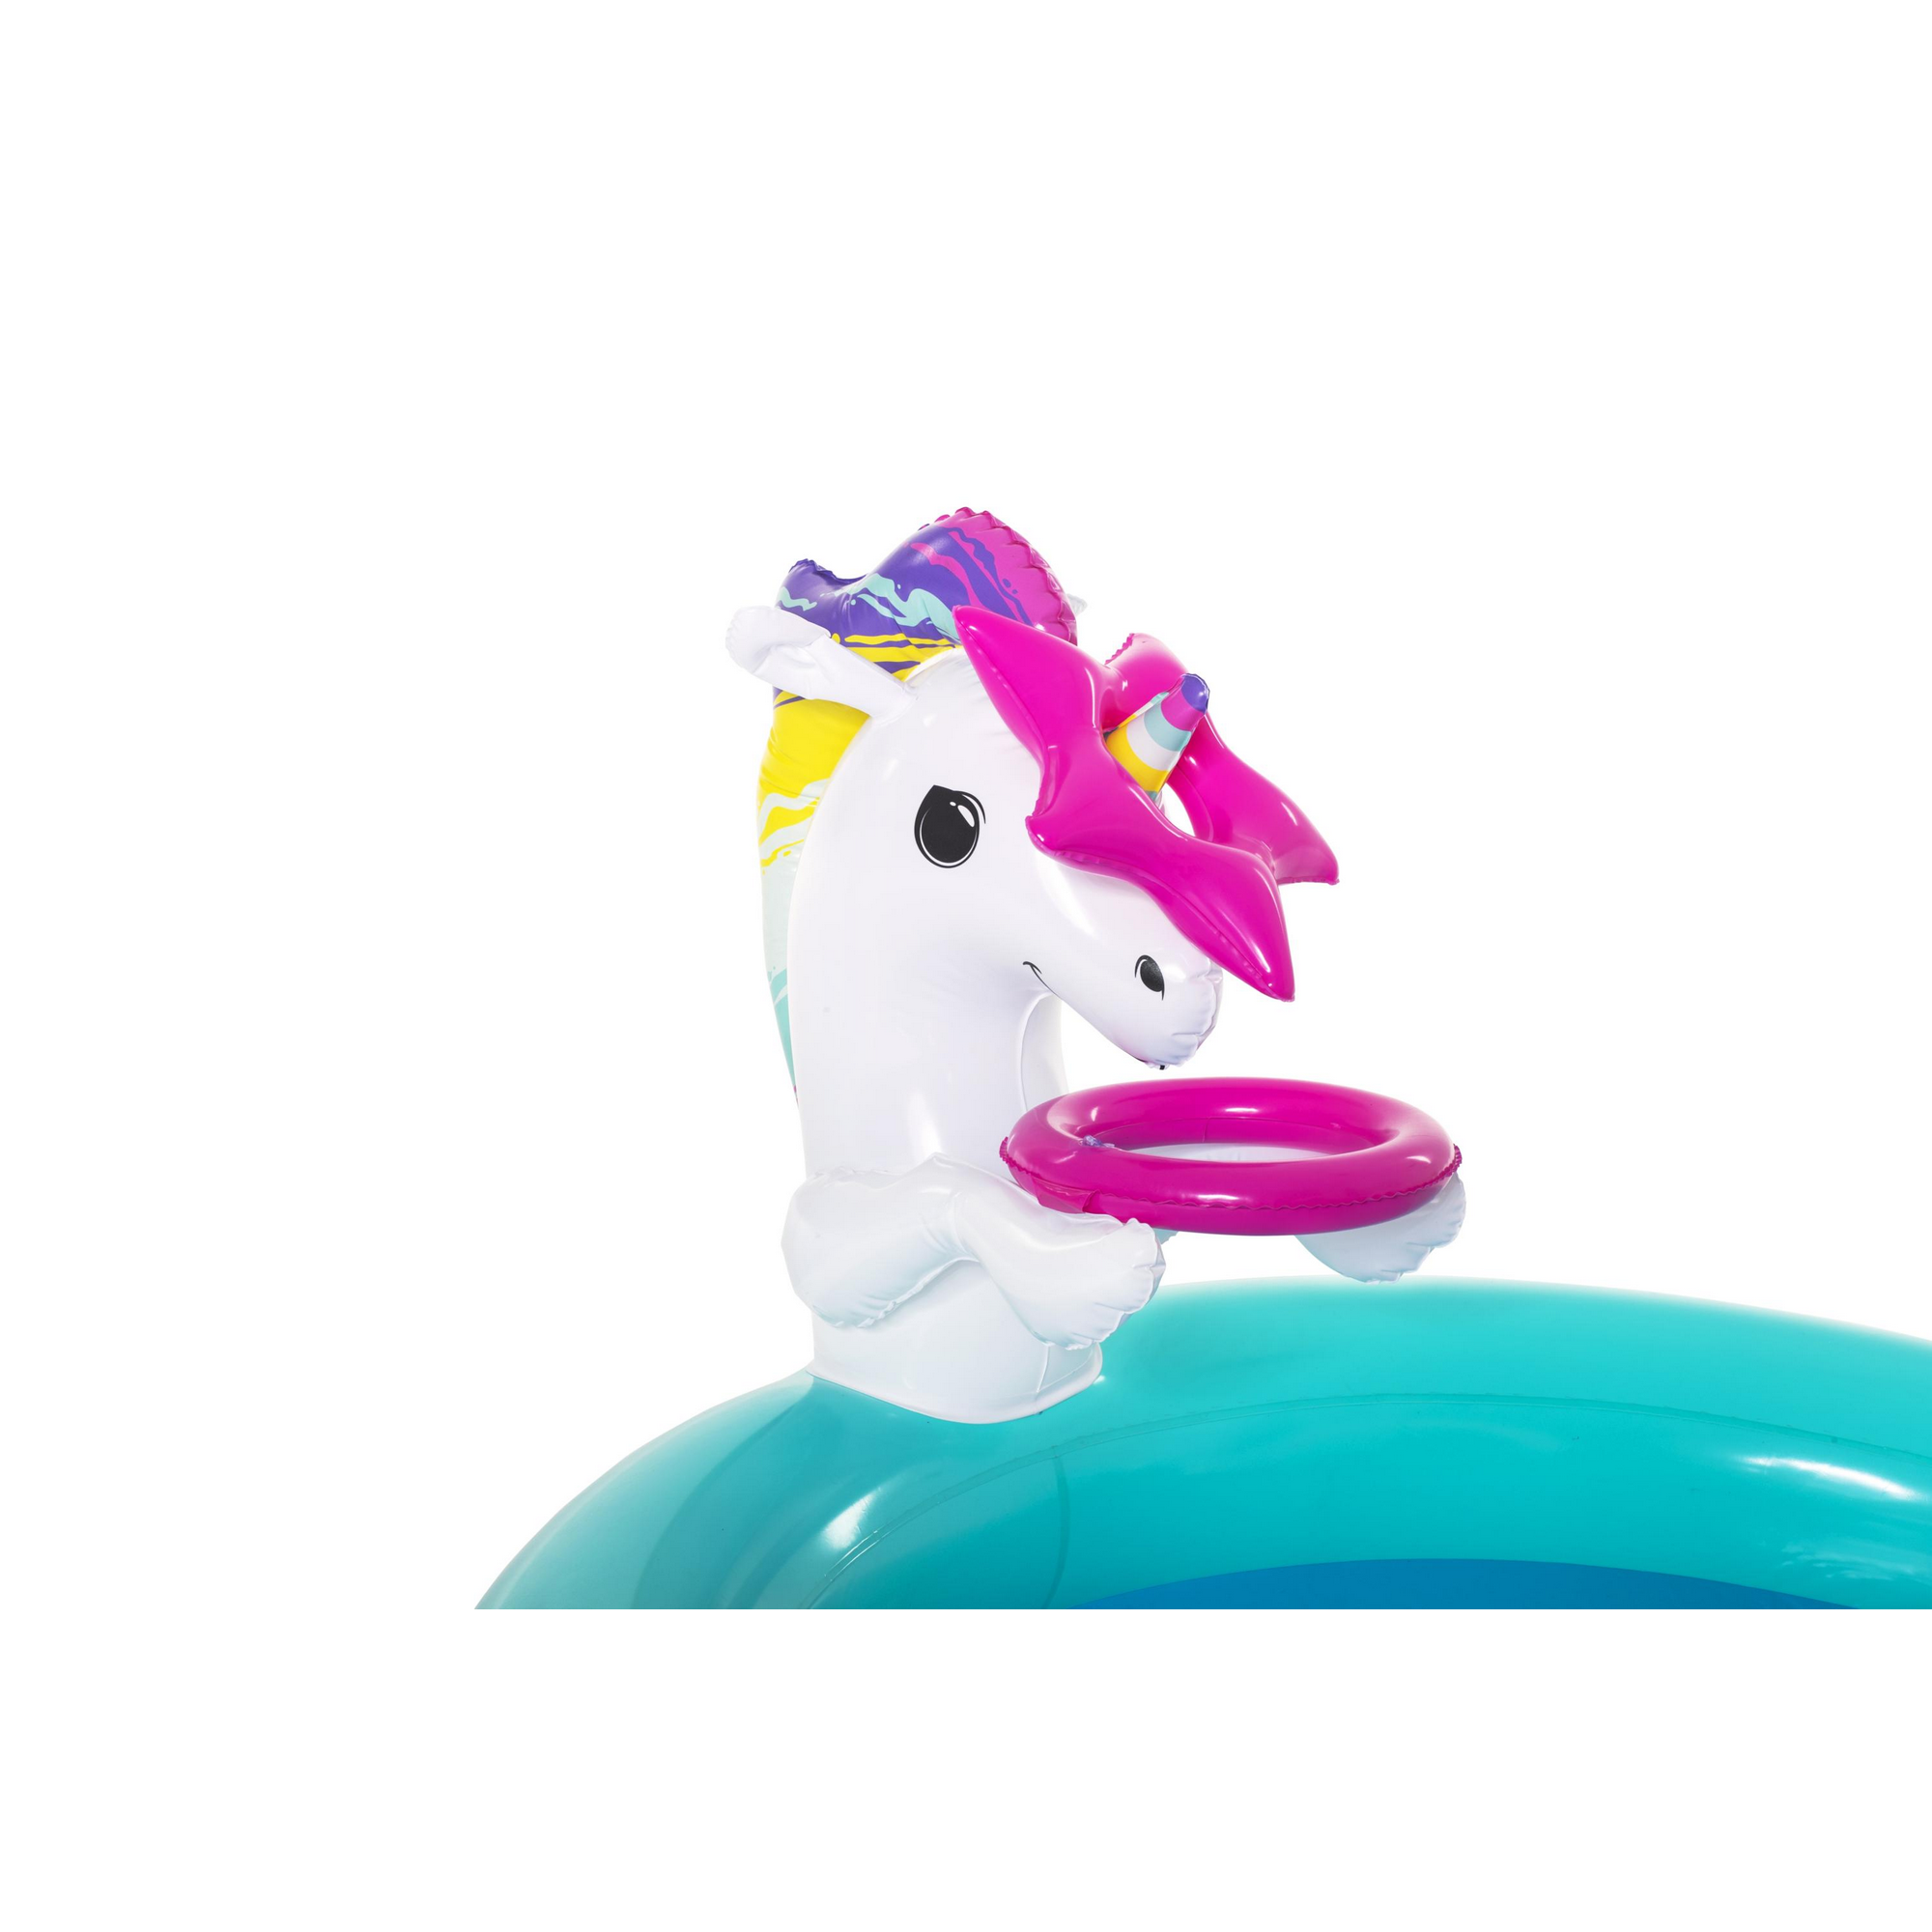 Wasserspielcenter 'Magical Unicorn' bunt 274 x 198 x 137 + product picture